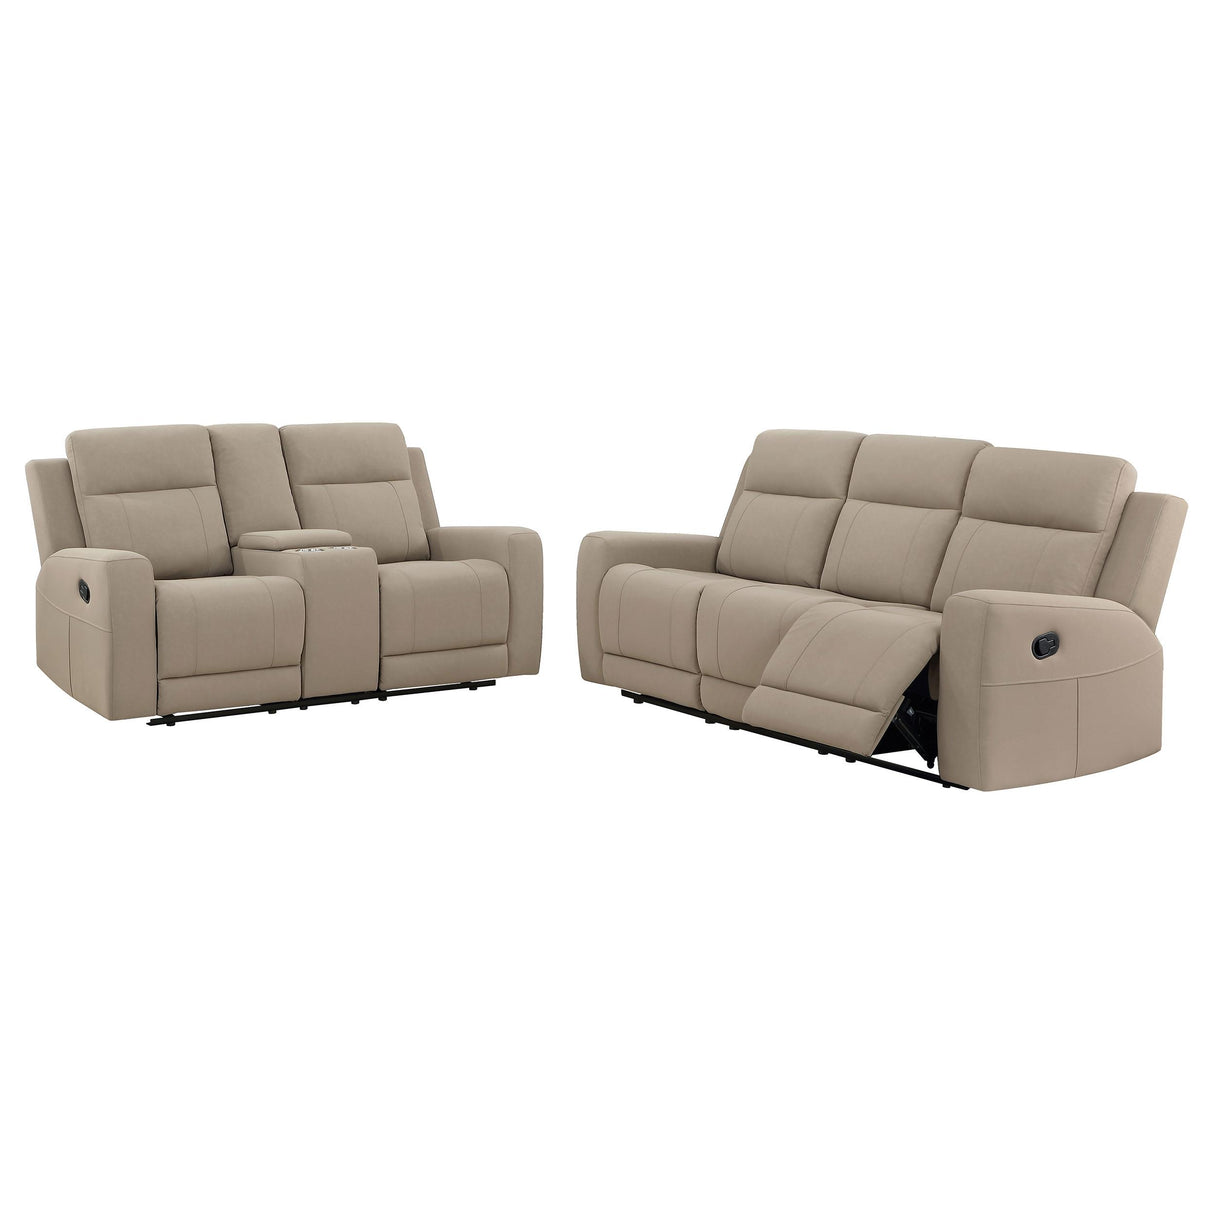 Brentwood 2-piece Upholstered Motion Reclining Sofa Set Taupe - 610281-S2